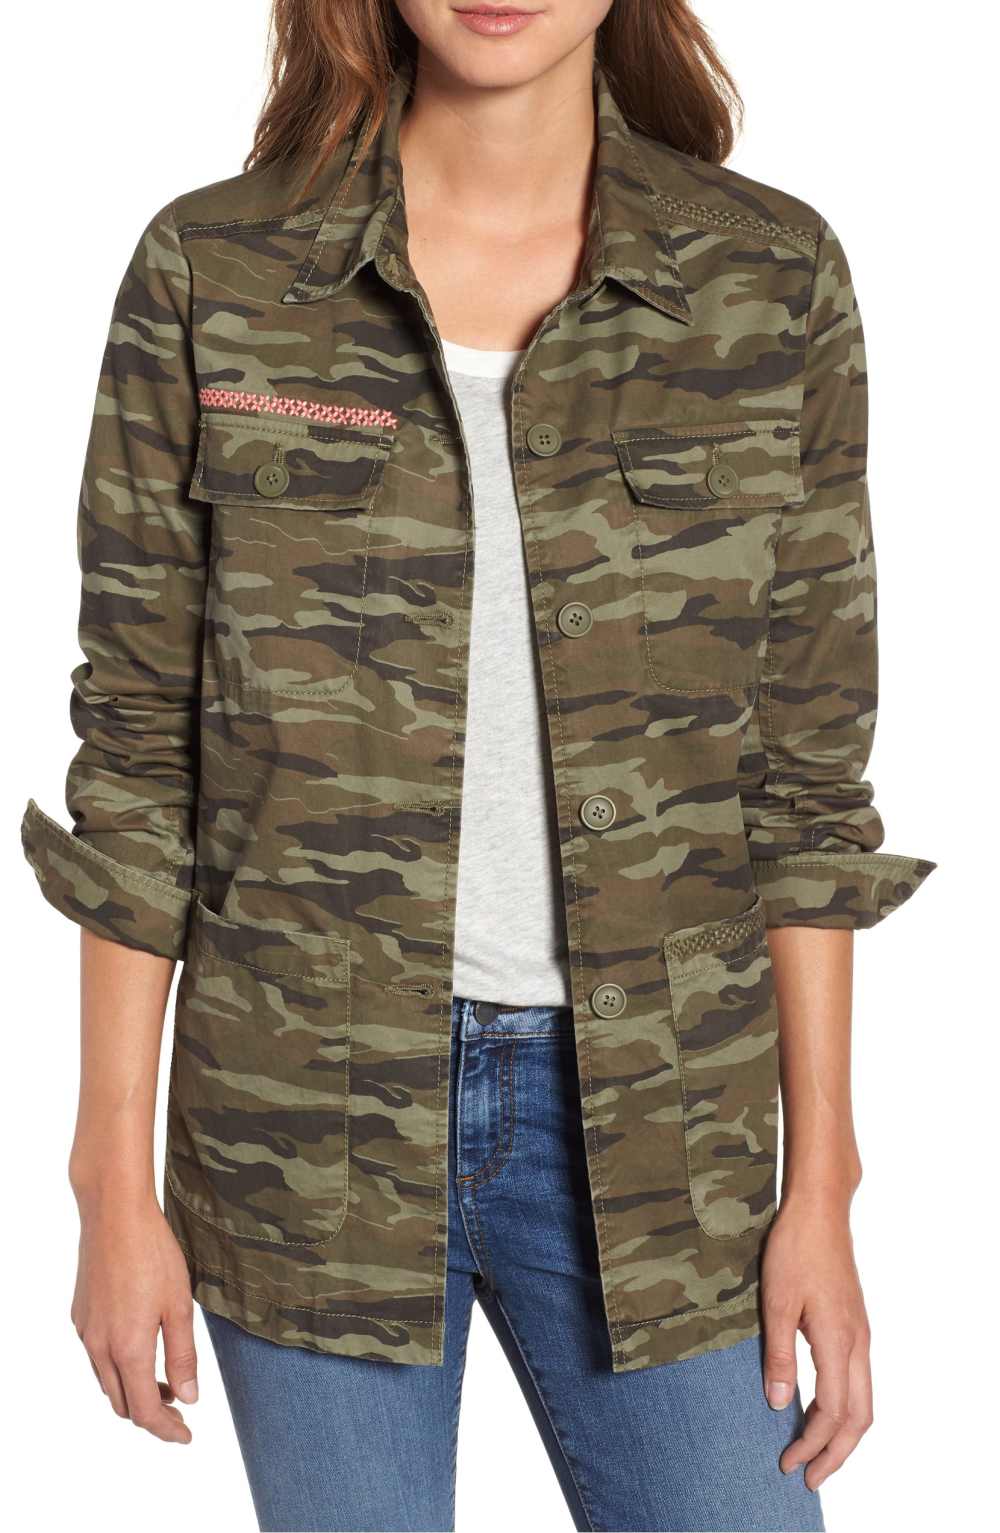 Get Ready for Fall With This Under $100 Caslon Utility Jacket | Us Weekly